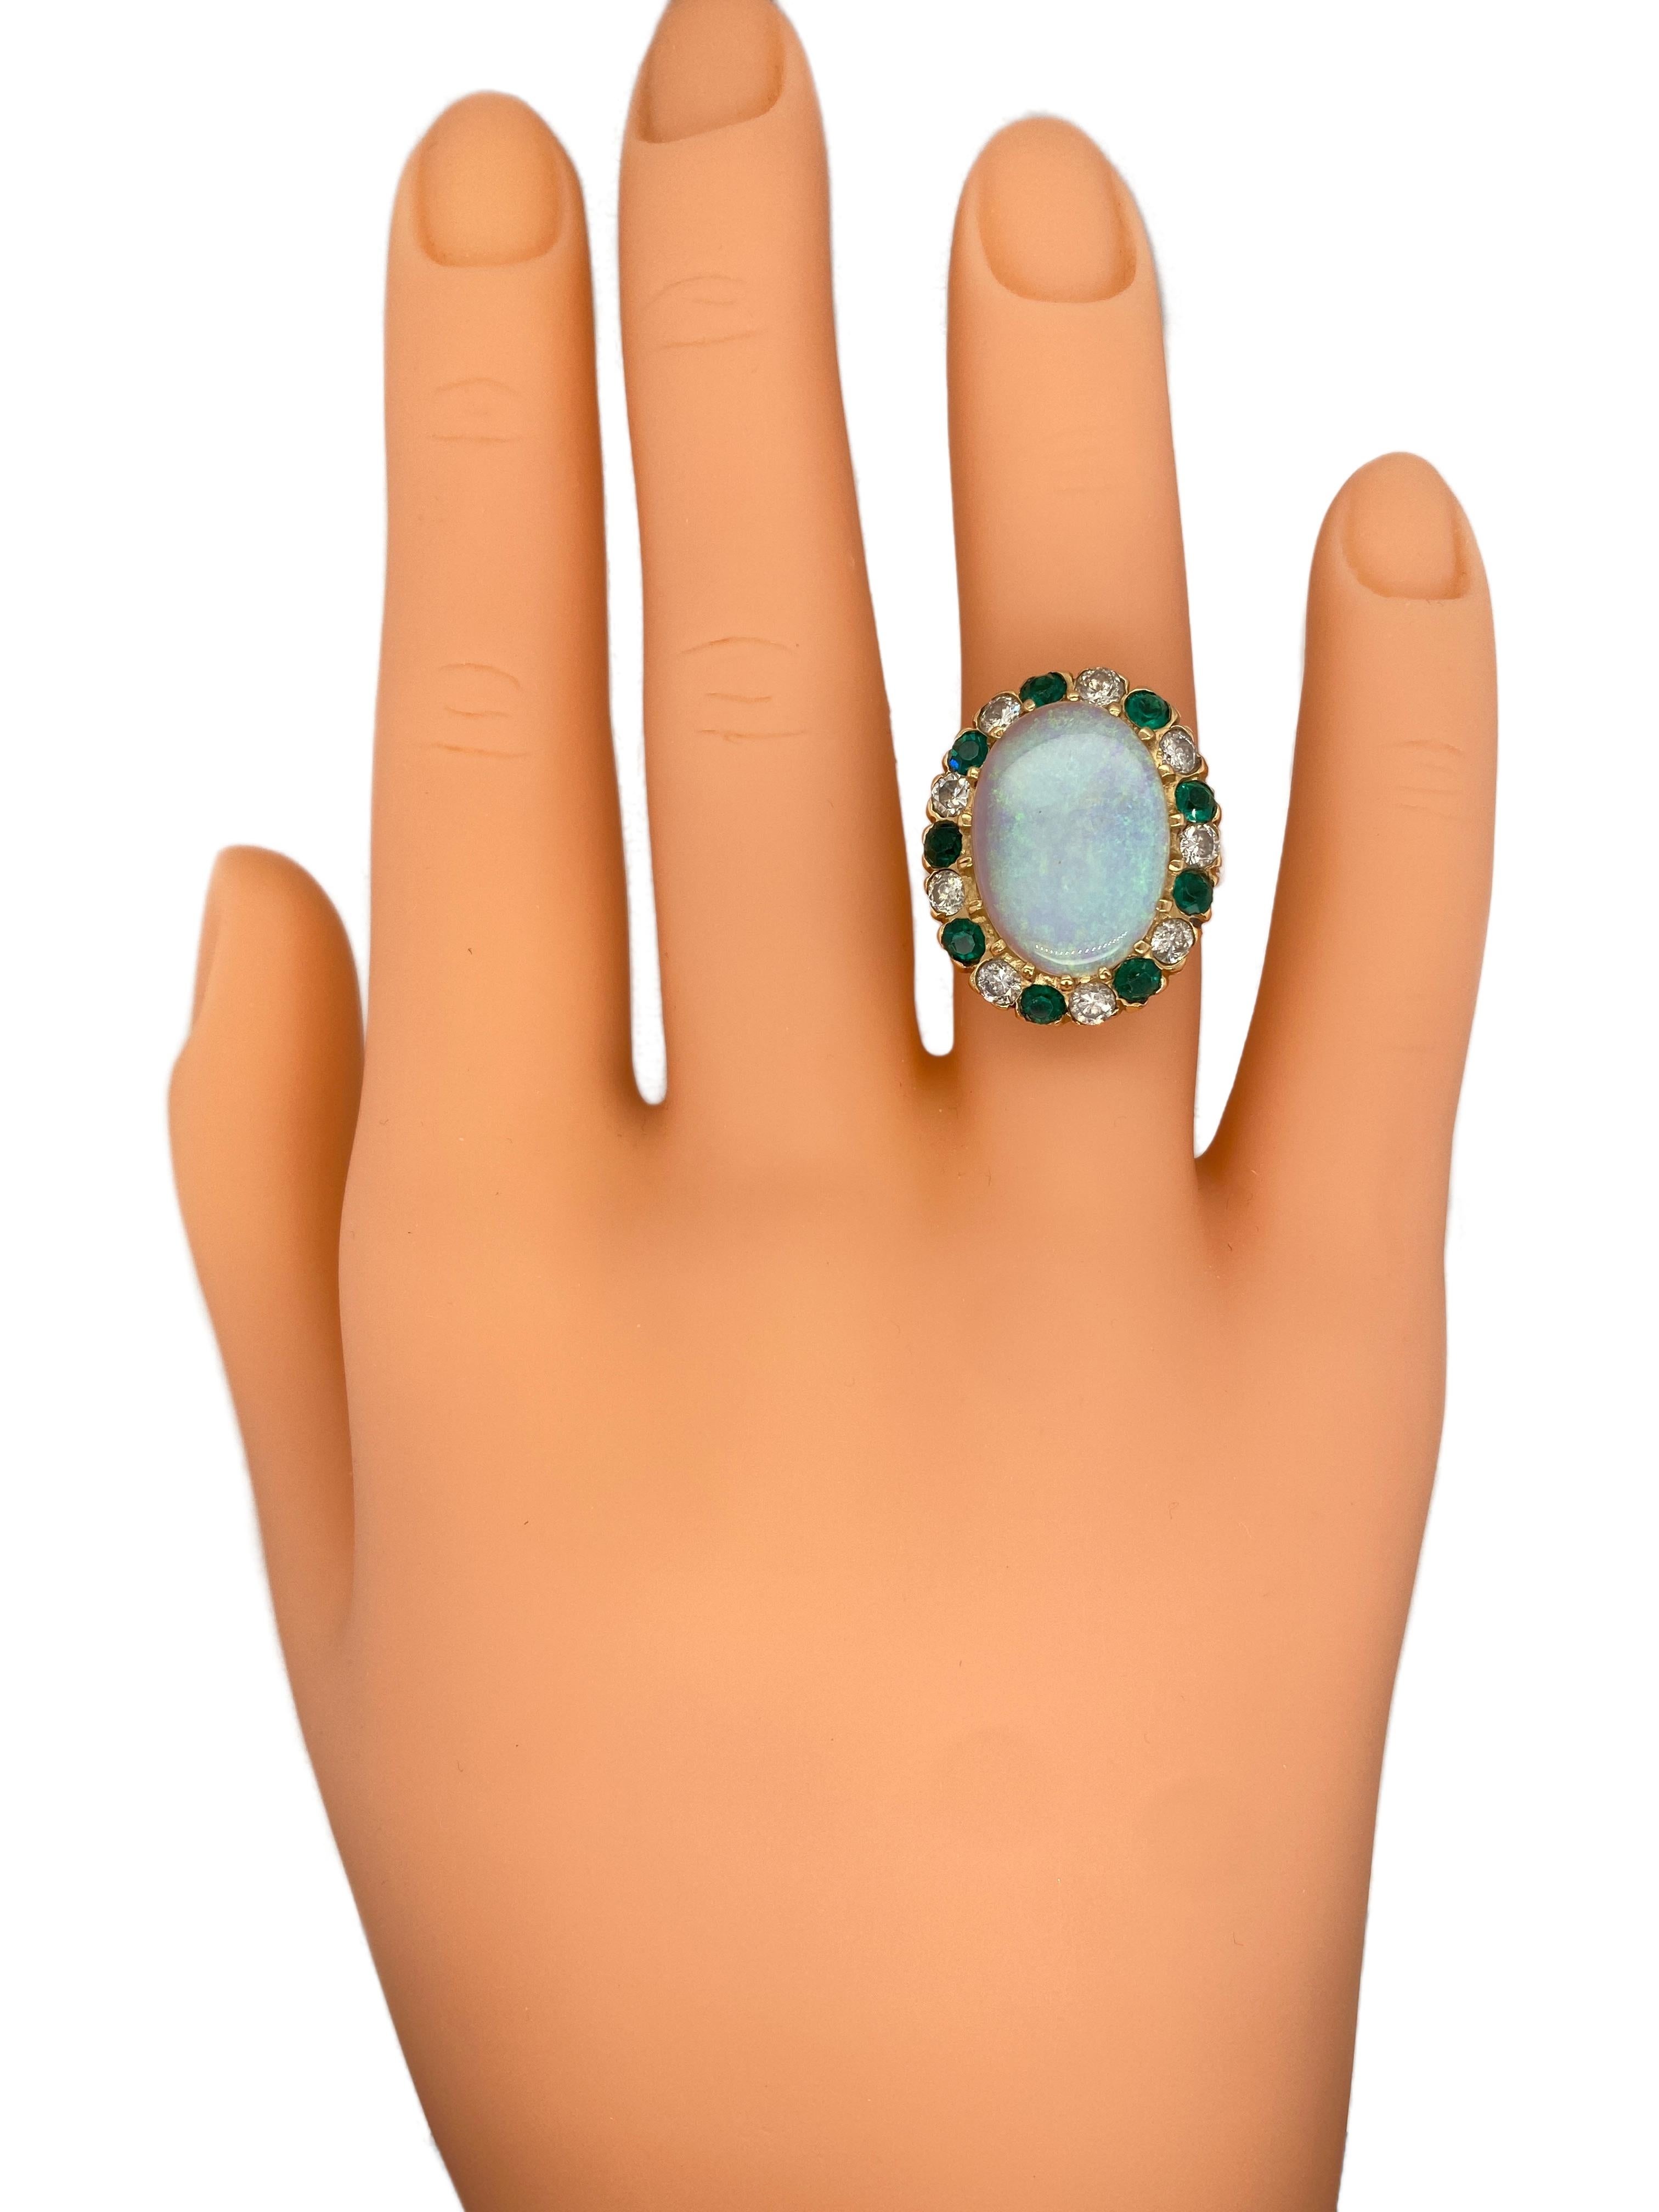 Circa 1950s 4.0 Carat Opal, Diamond and Green Glass Halo Ring in 14K Gold In Good Condition For Sale In Addison, TX